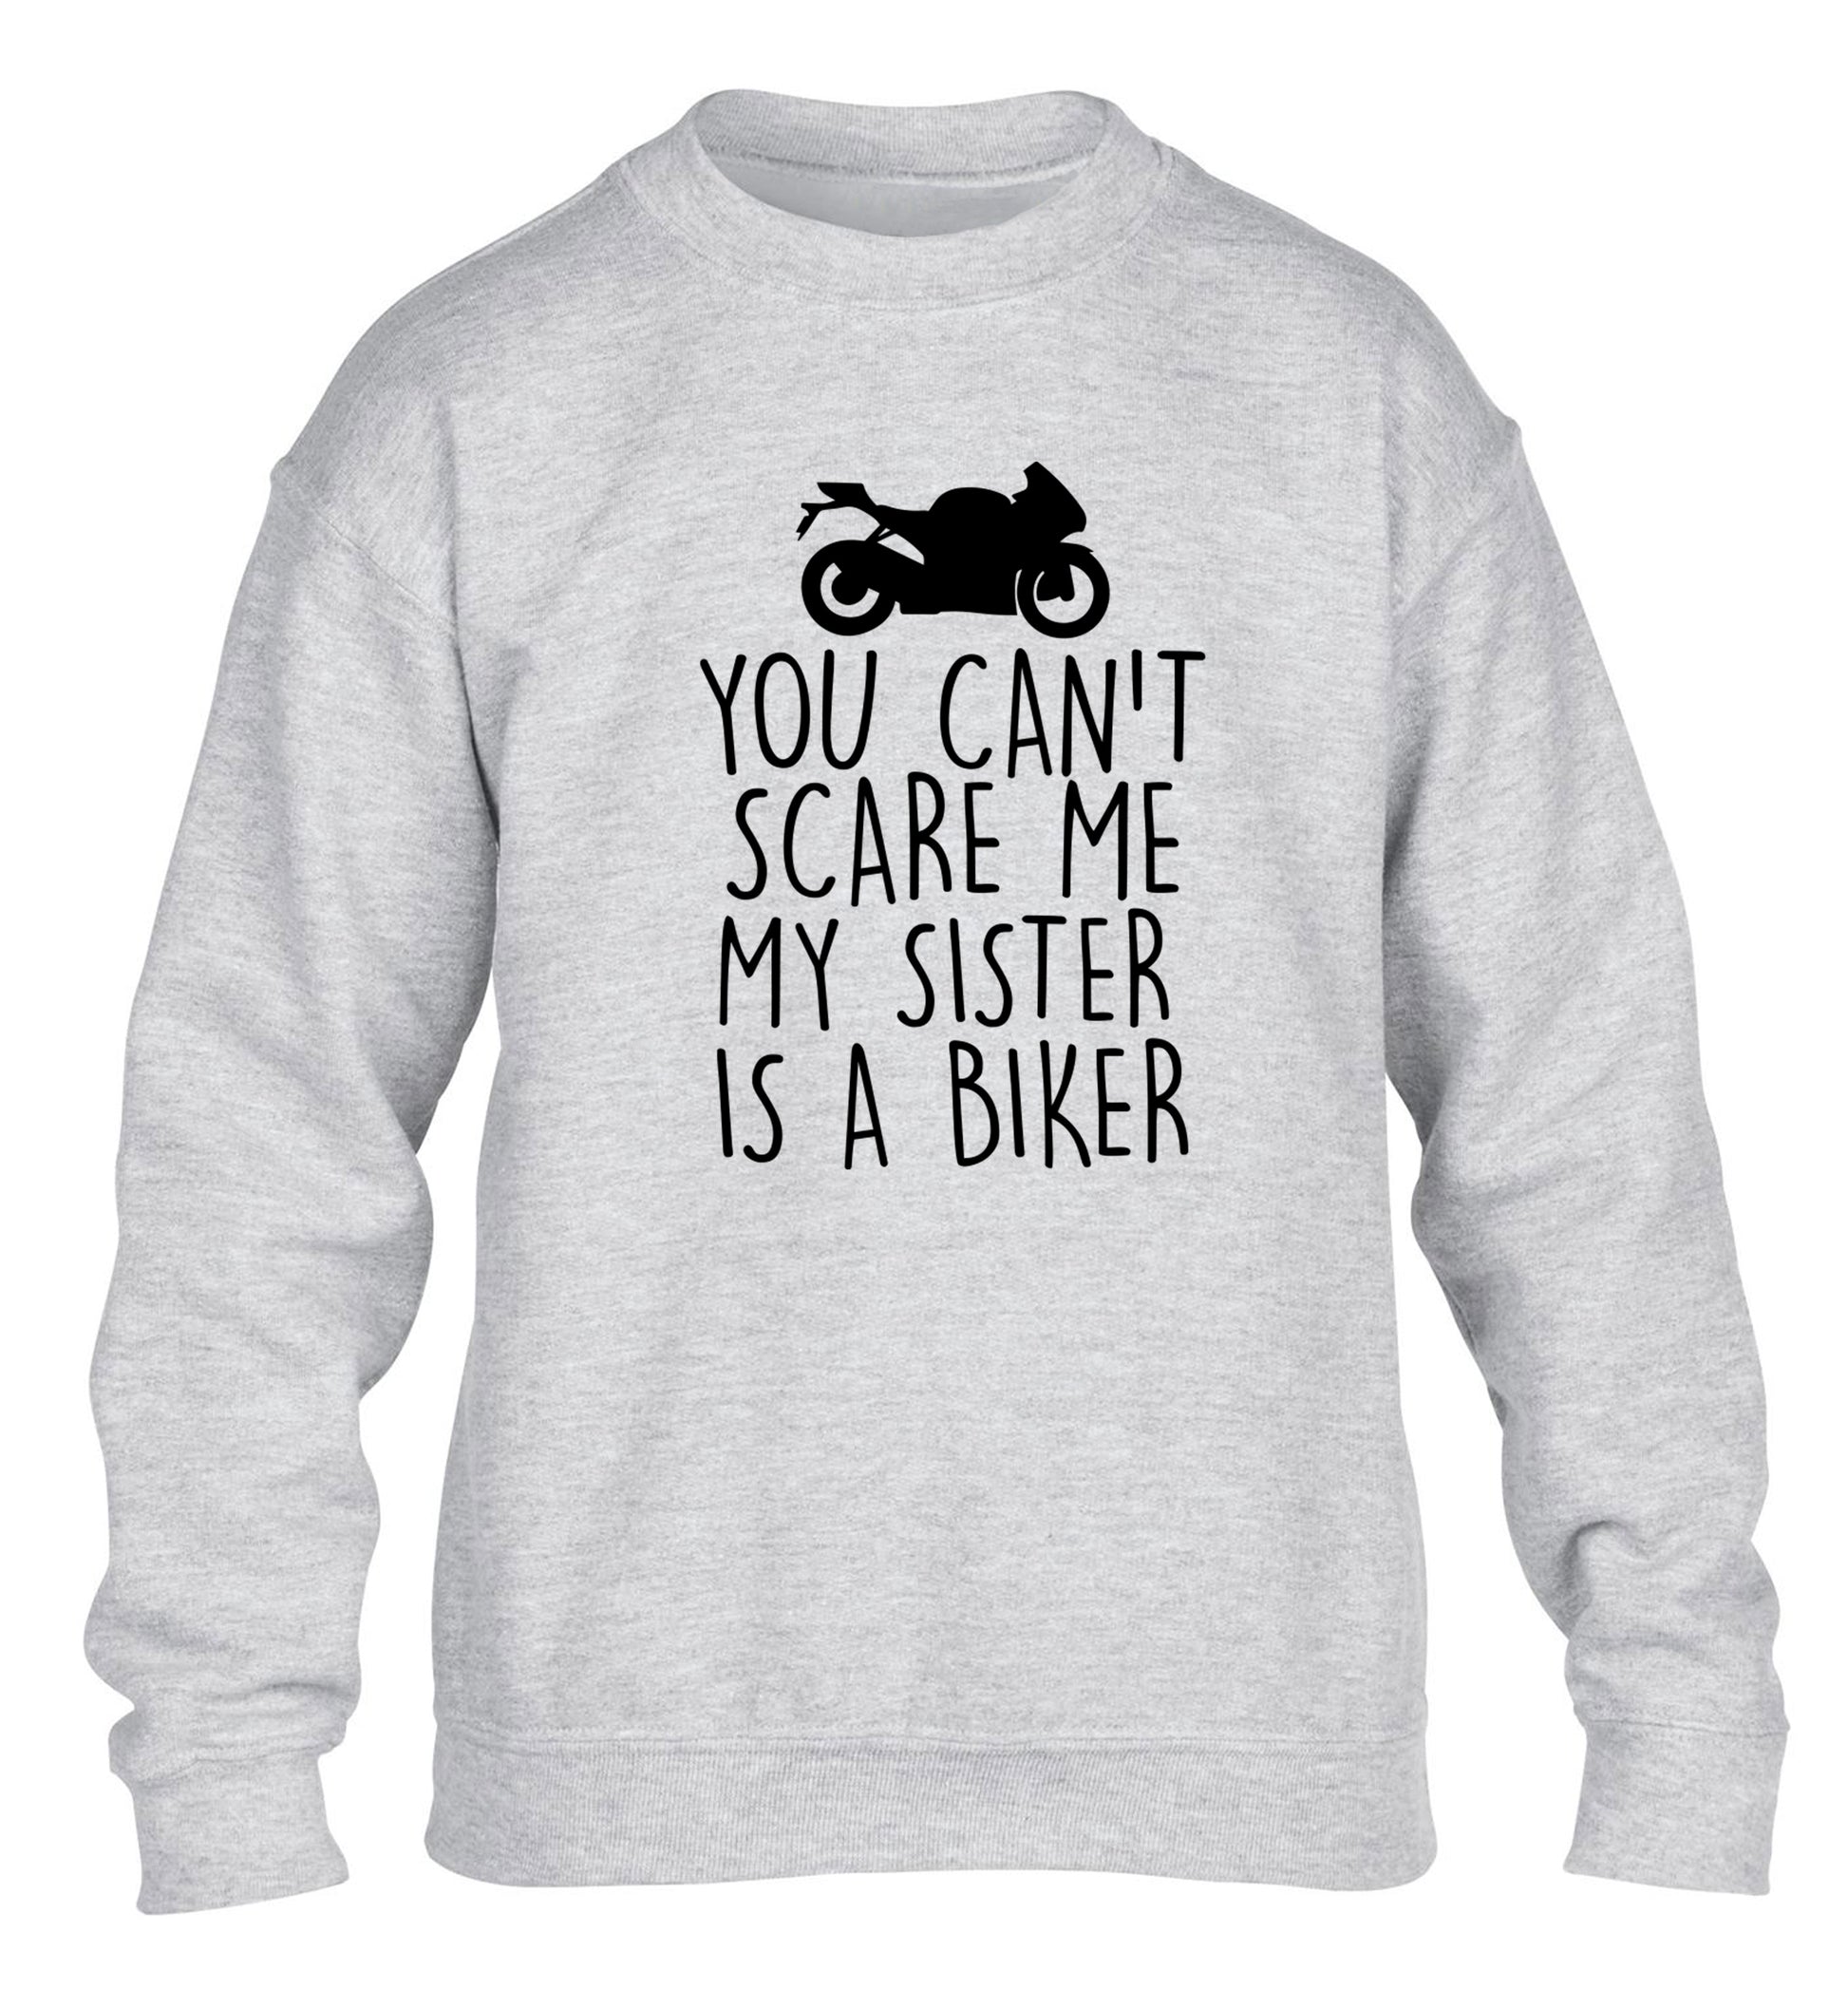 You can't scare me my sister is a biker children's grey sweater 12-13 Years